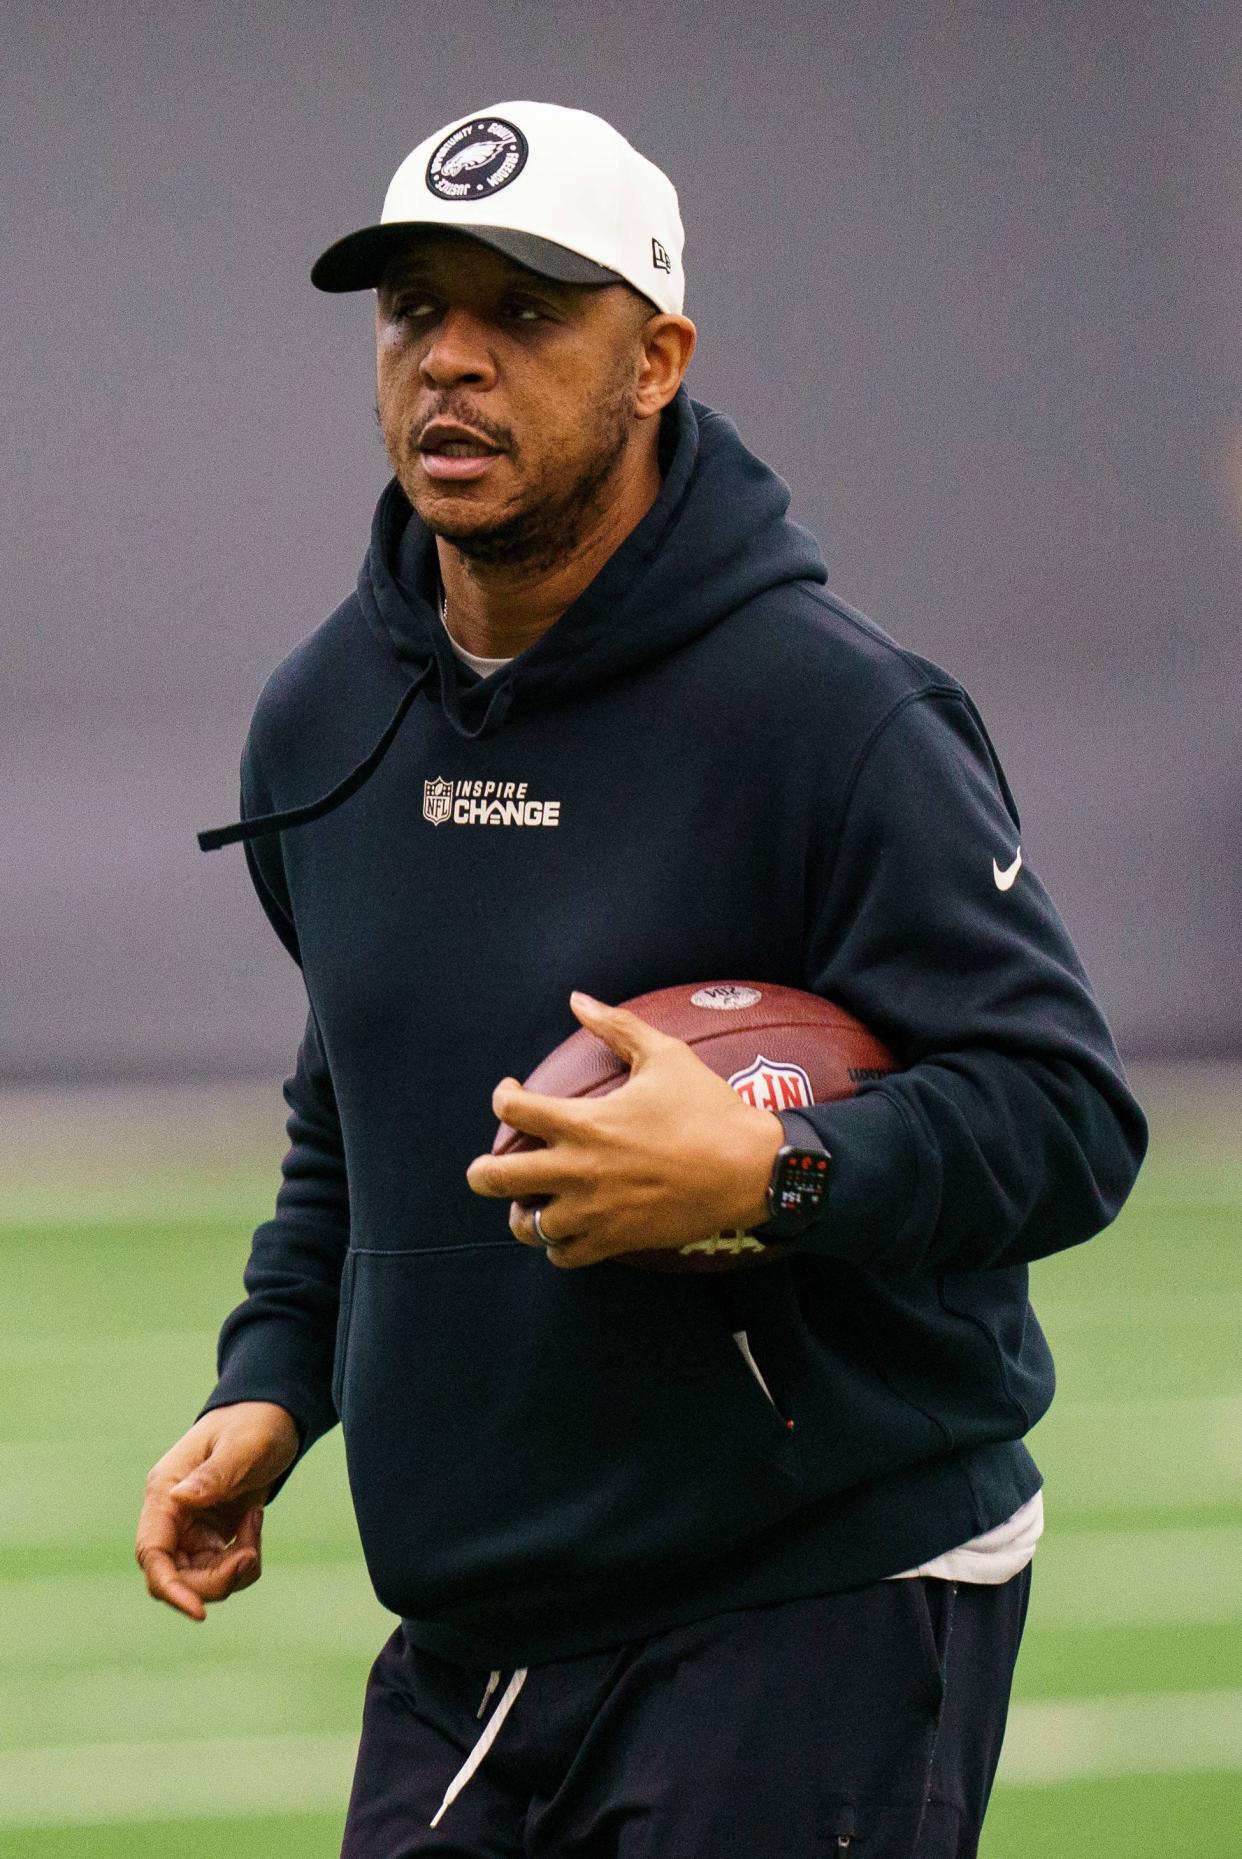 D.K. McDonald, a 2001 Edinboro University graduate and former football player for the Fighting Scots, is shown here in a Jan. 26, 2023, photograph in his role as assistant defensive backs coach for the Philadelphia Eagles. McDonald had that role last season when the Eagles lost to the Kansas City Chiefs in Super Bowl LVII.